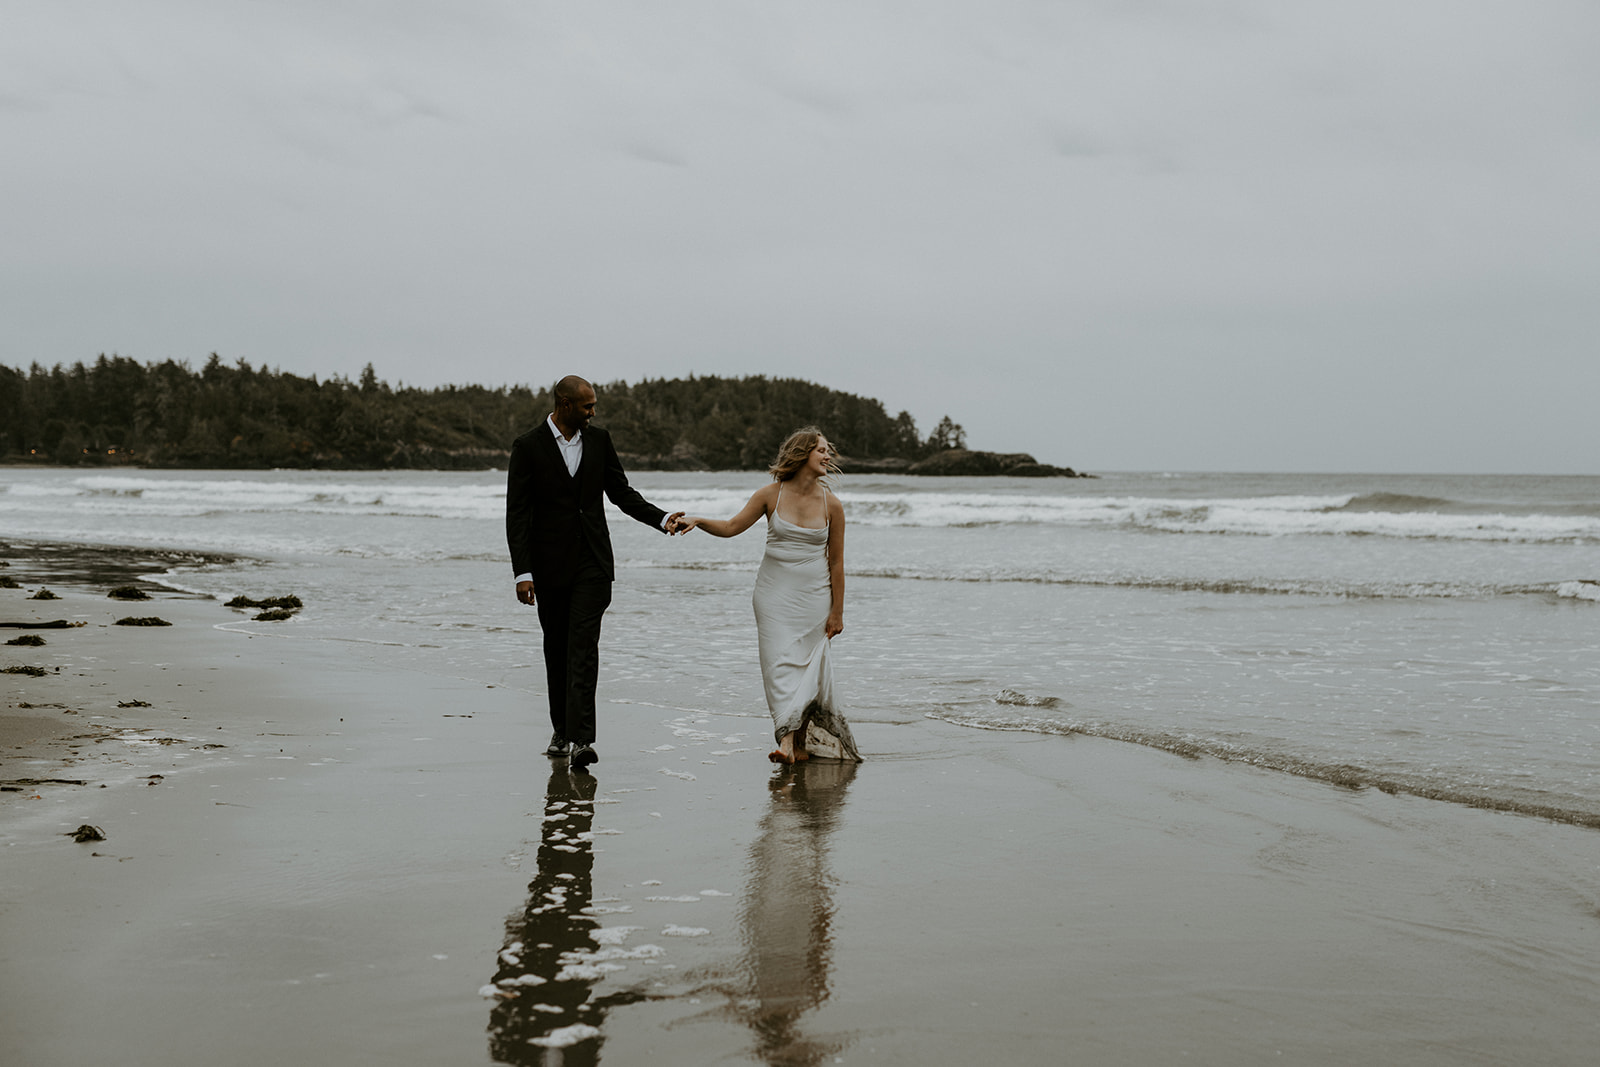 Intimate Elopement Photography in Tofino BC